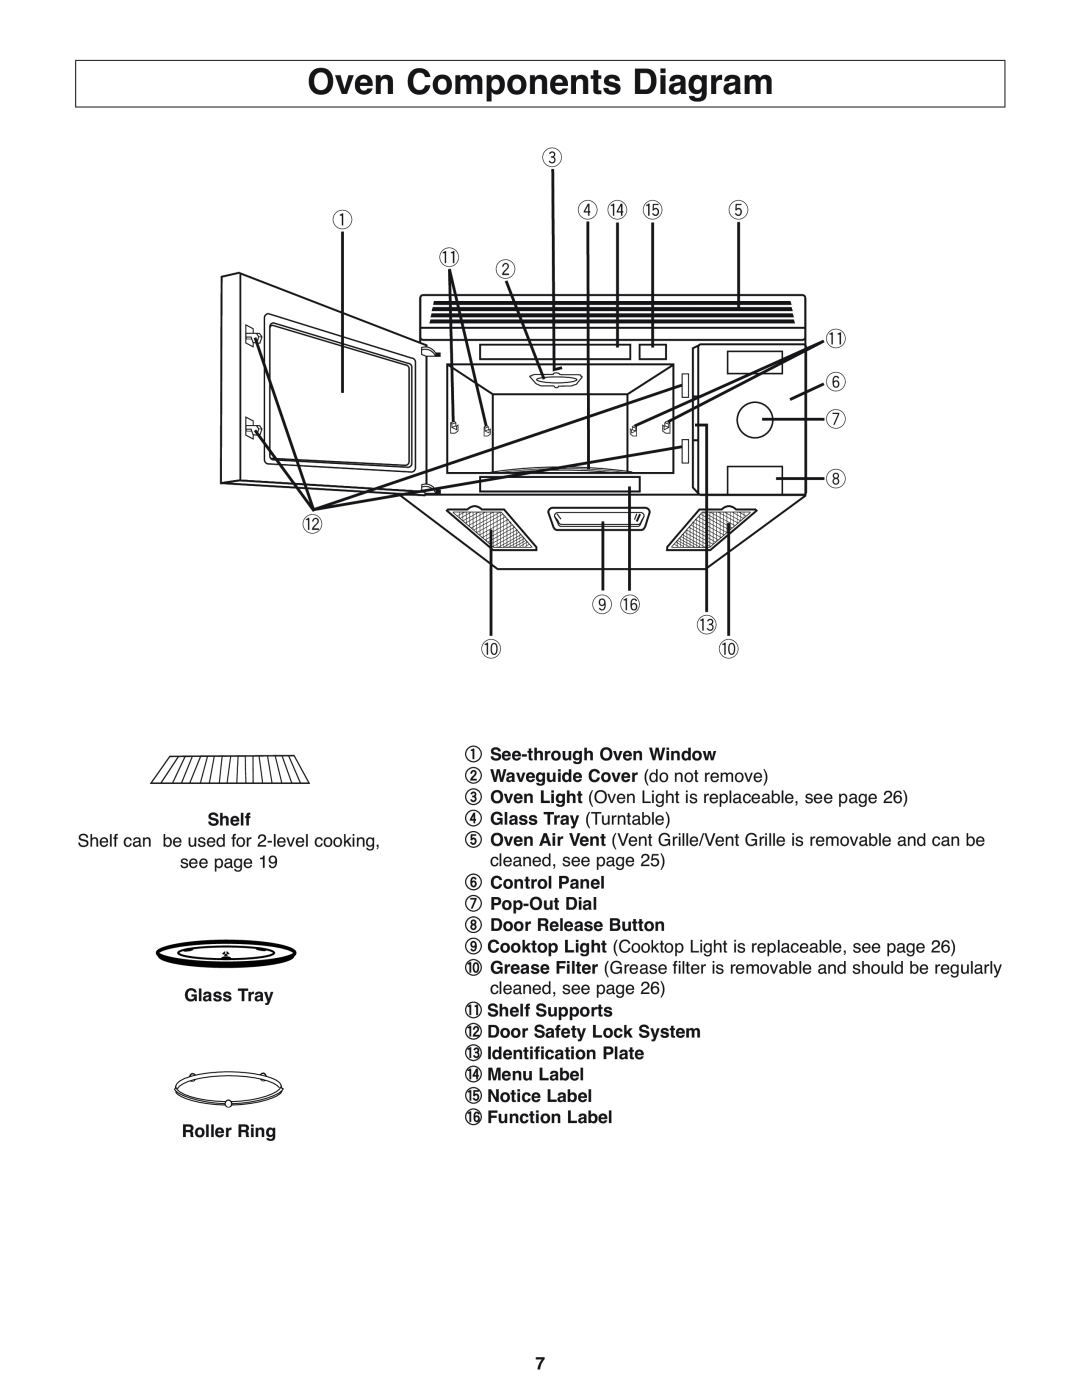 Panasonic NN-H275 operating instructions Oven Components Diagram 